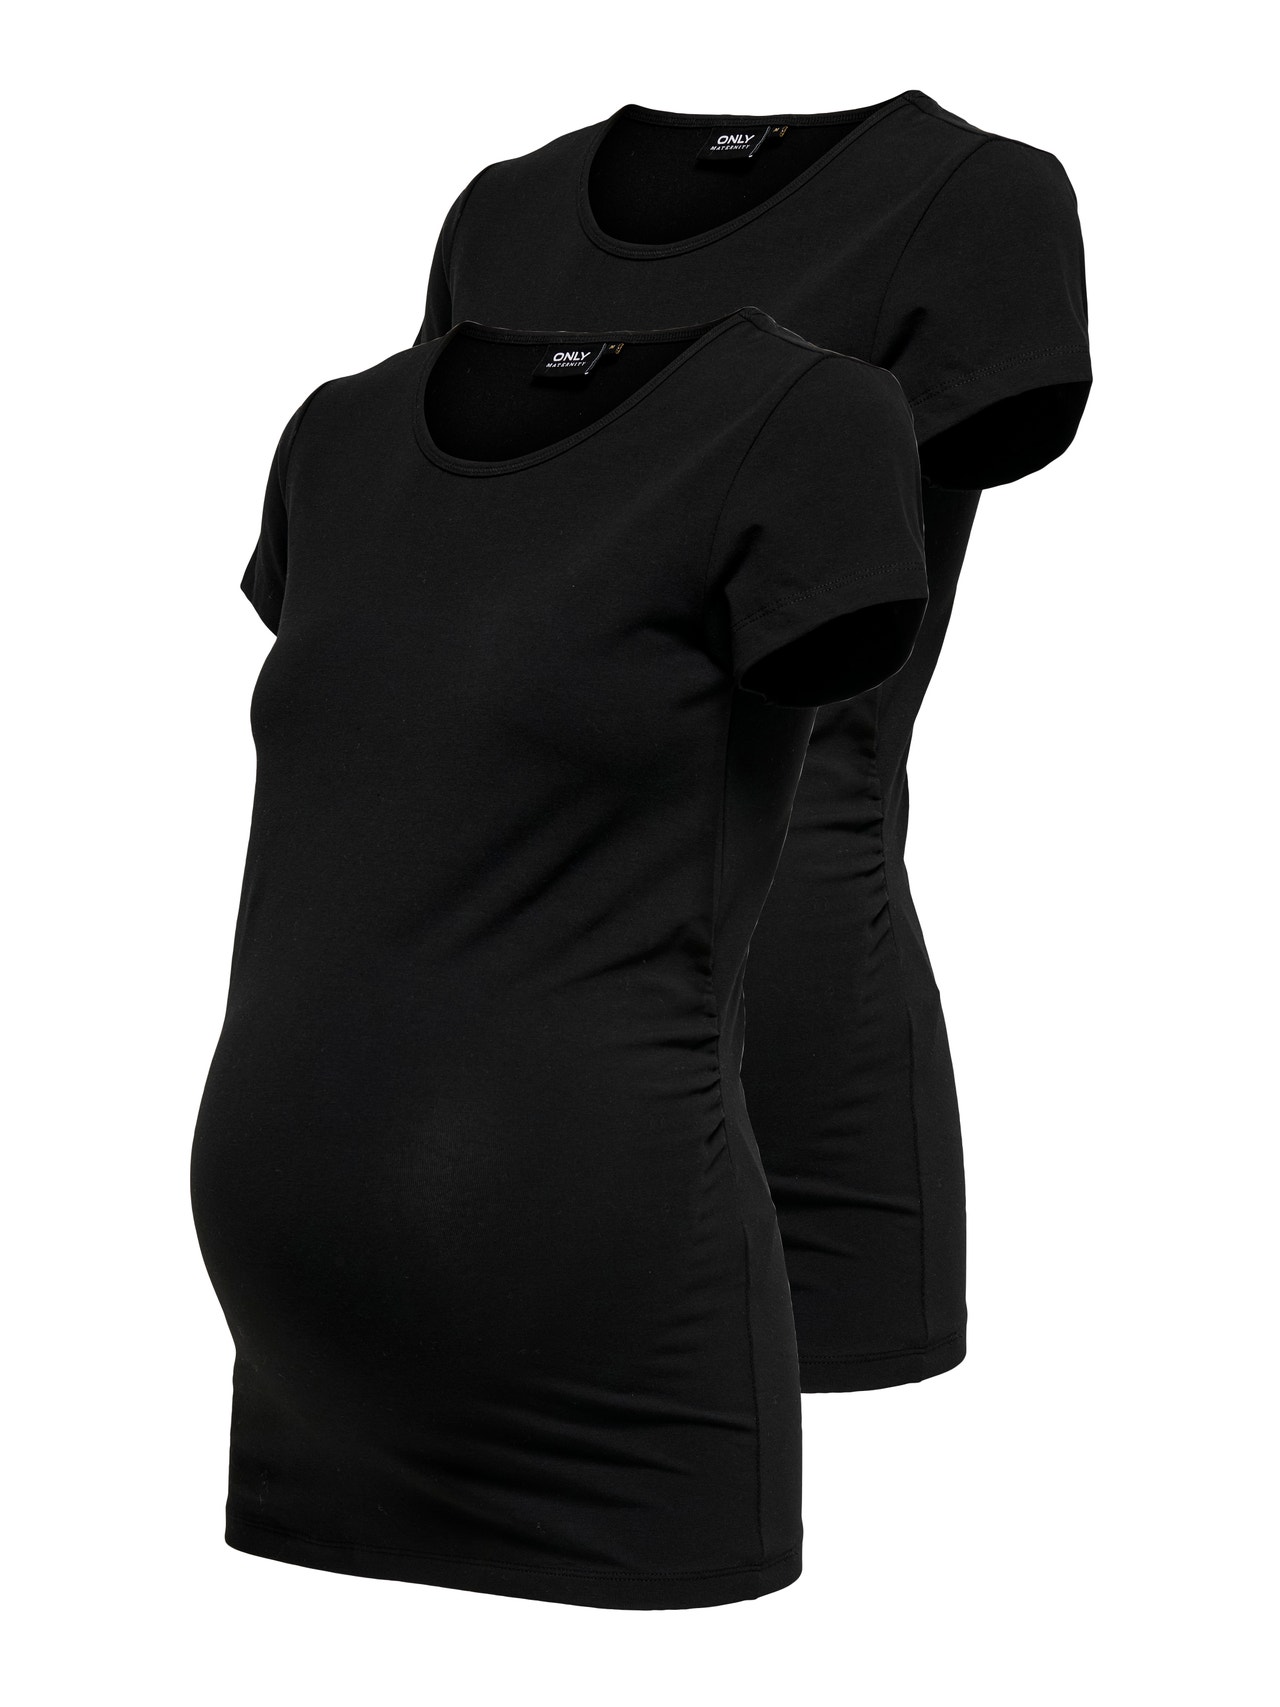 ONLY Mama 2-pack basic T-shirt -Black - 15247221